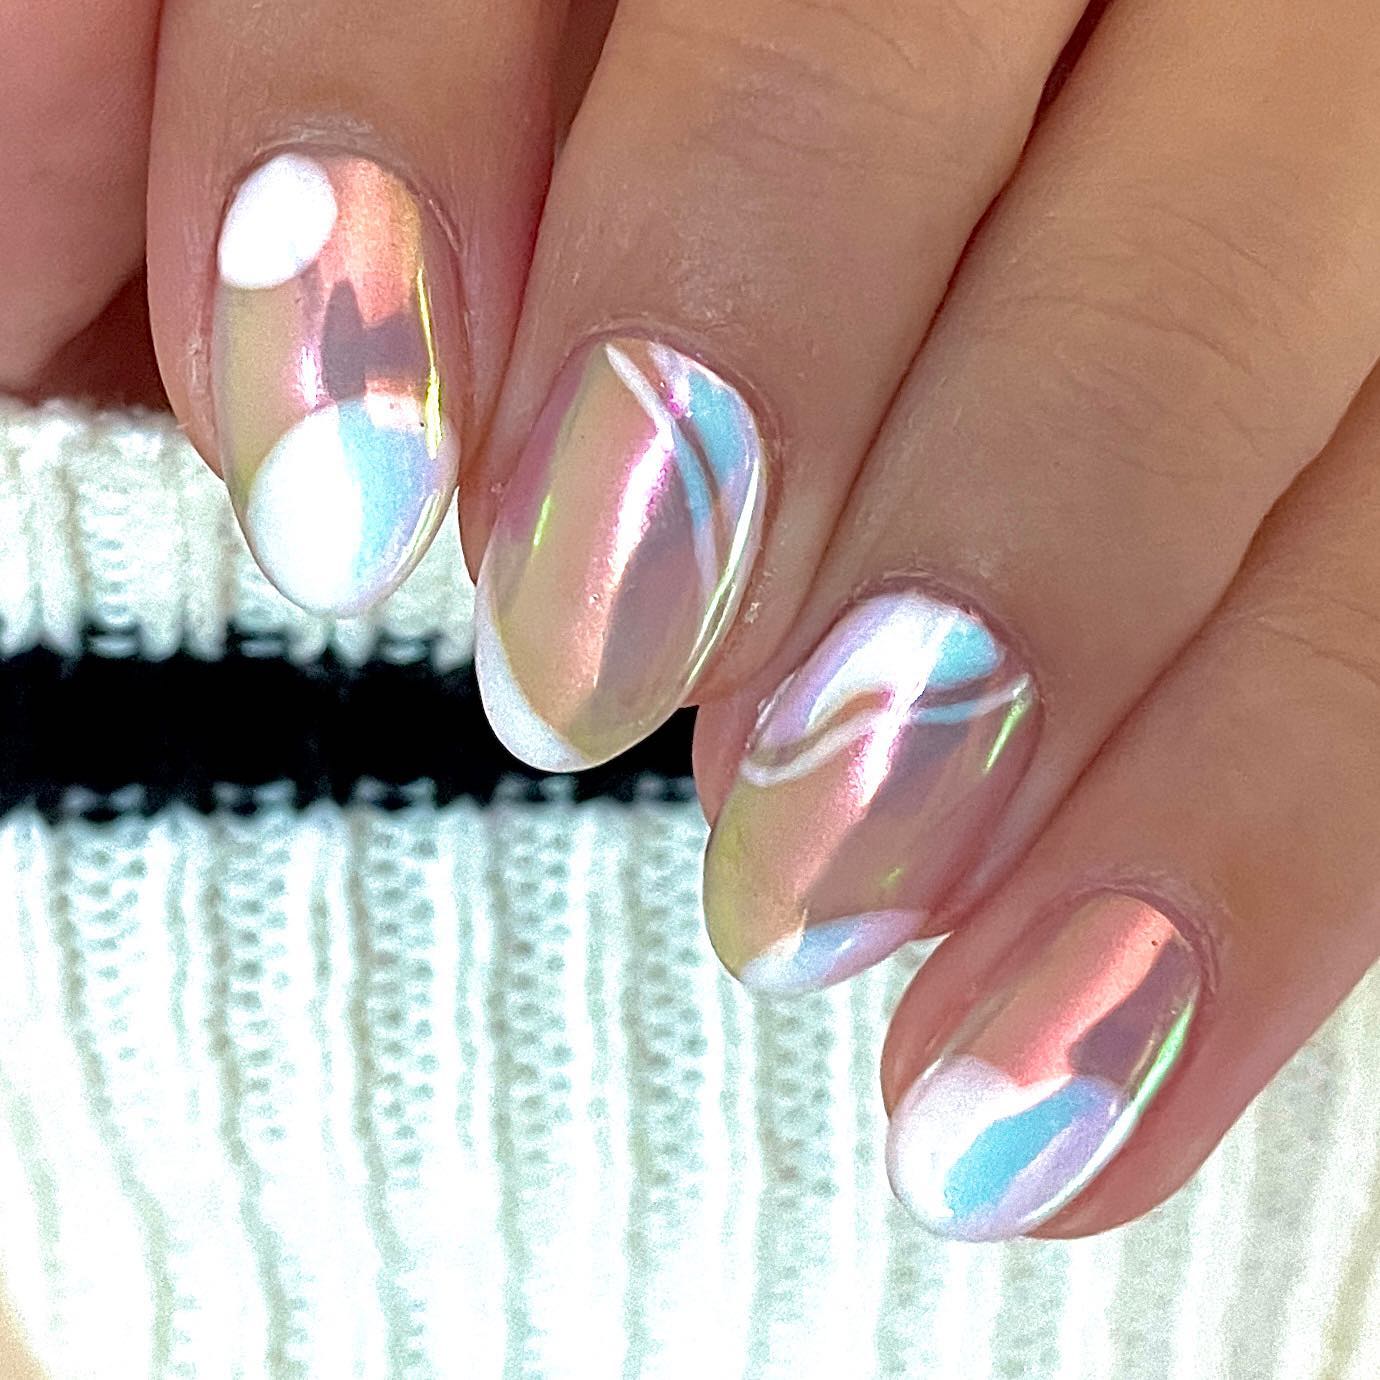 Glossy and so unique, this manicure is for those who enjoy glass-like ideas and weird quirky designs.